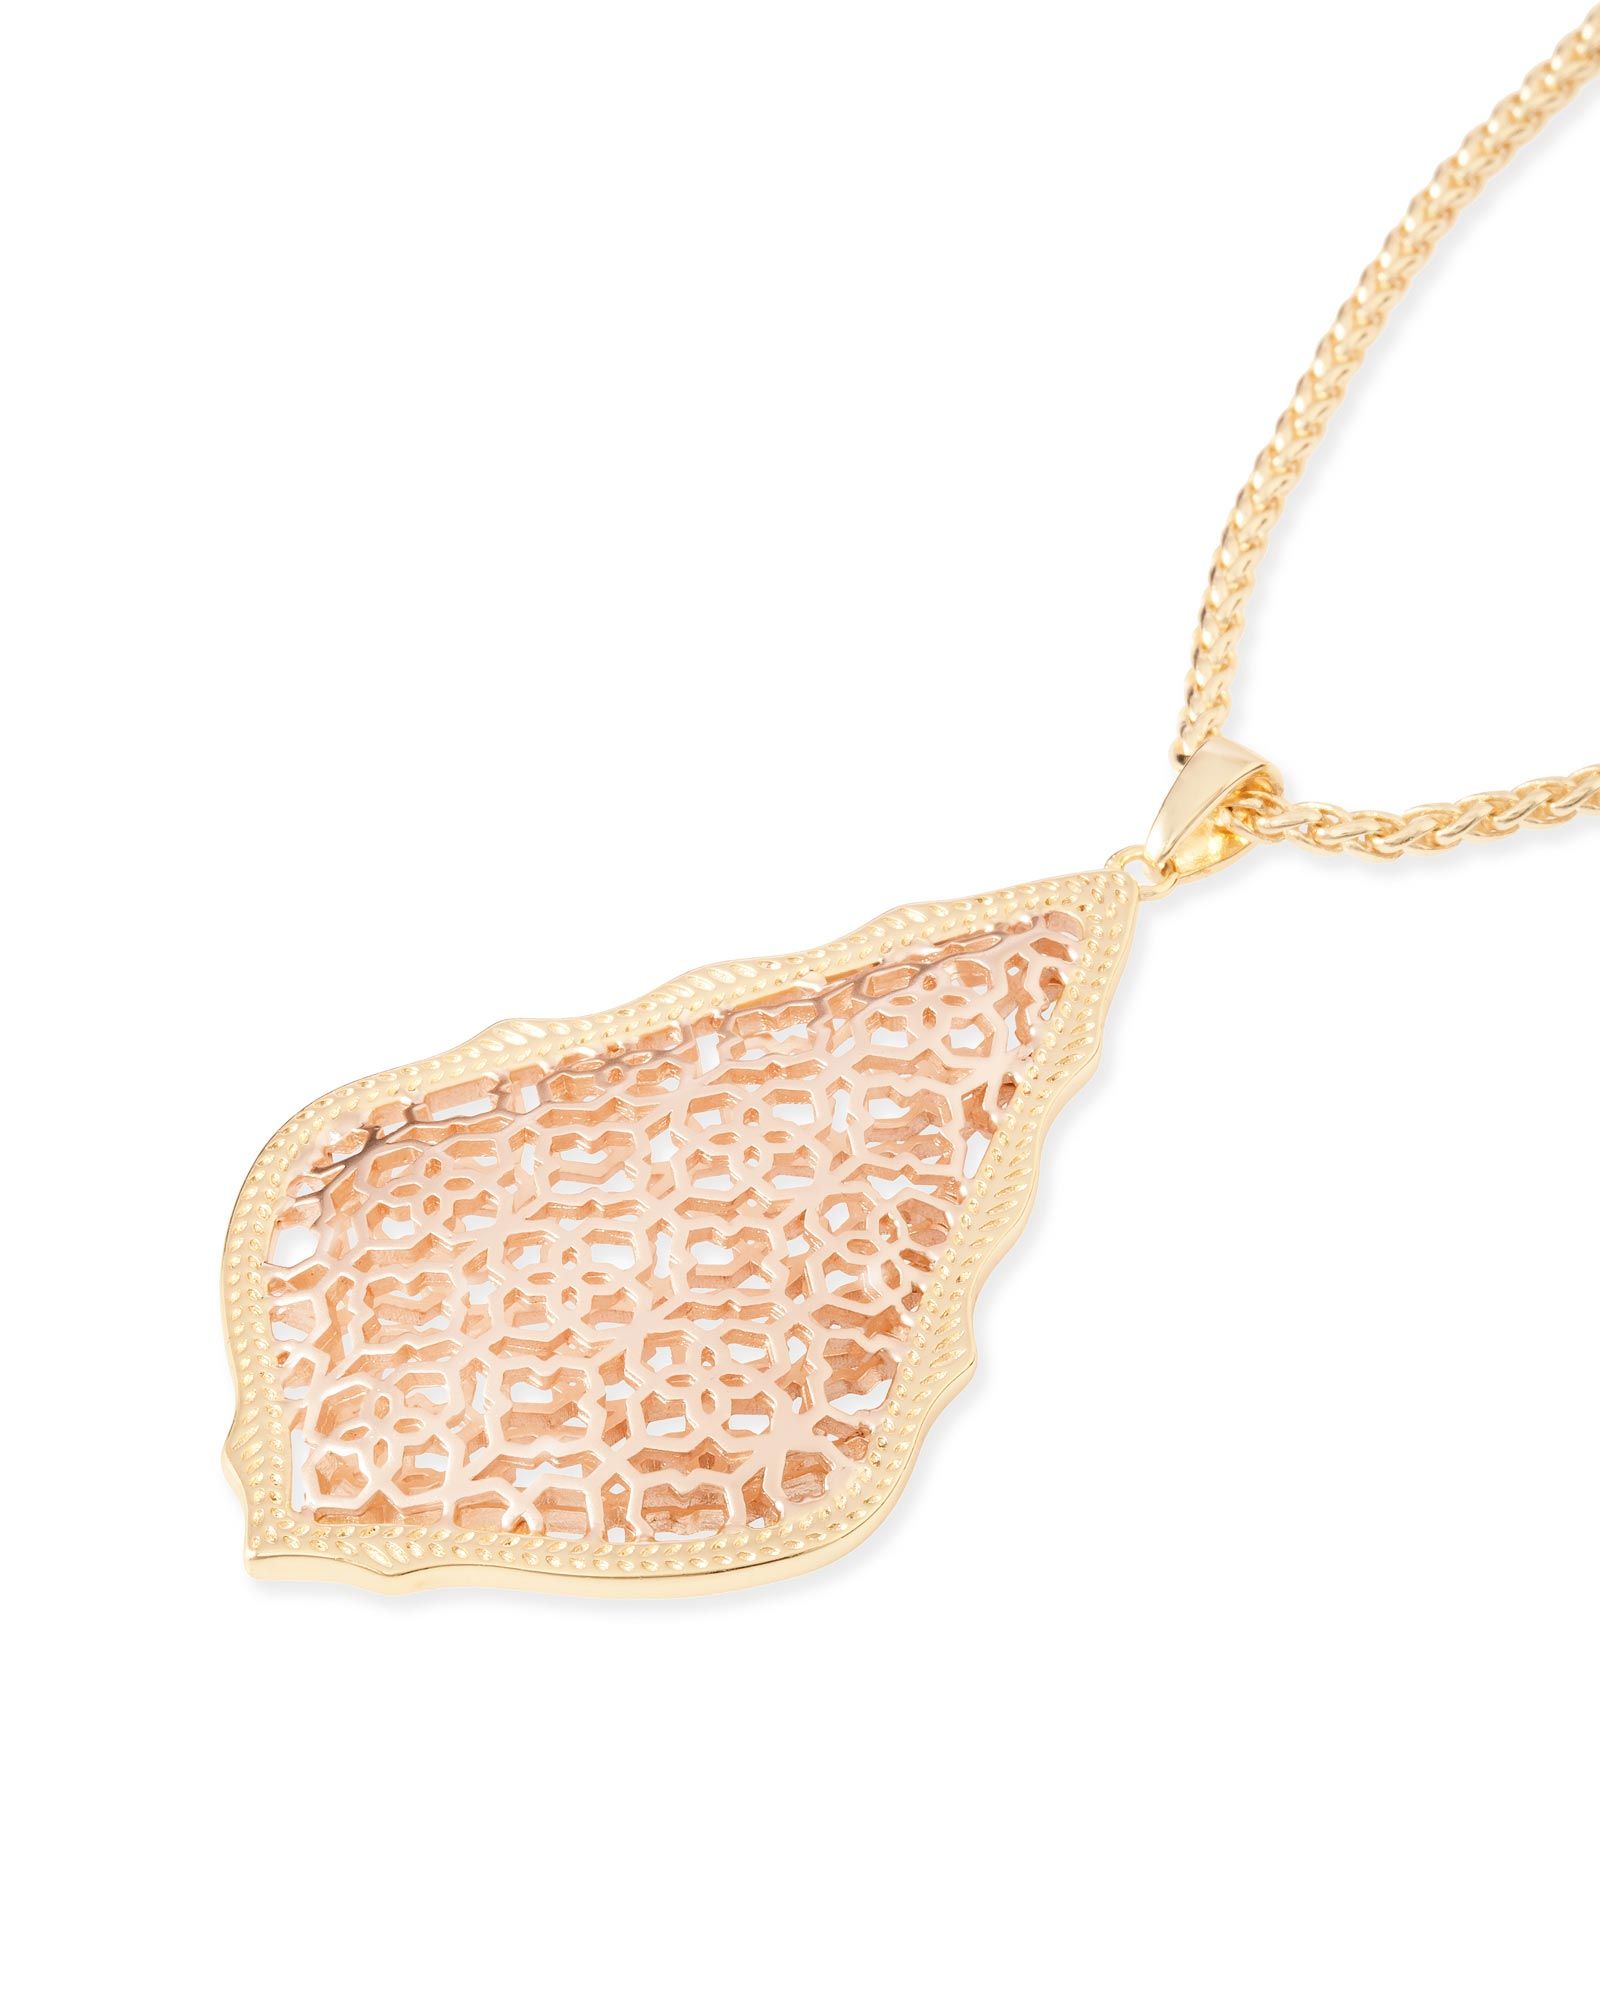 Aiden Gold Long Pendant Necklace in Rose Gold Filigree | Kendra Scott